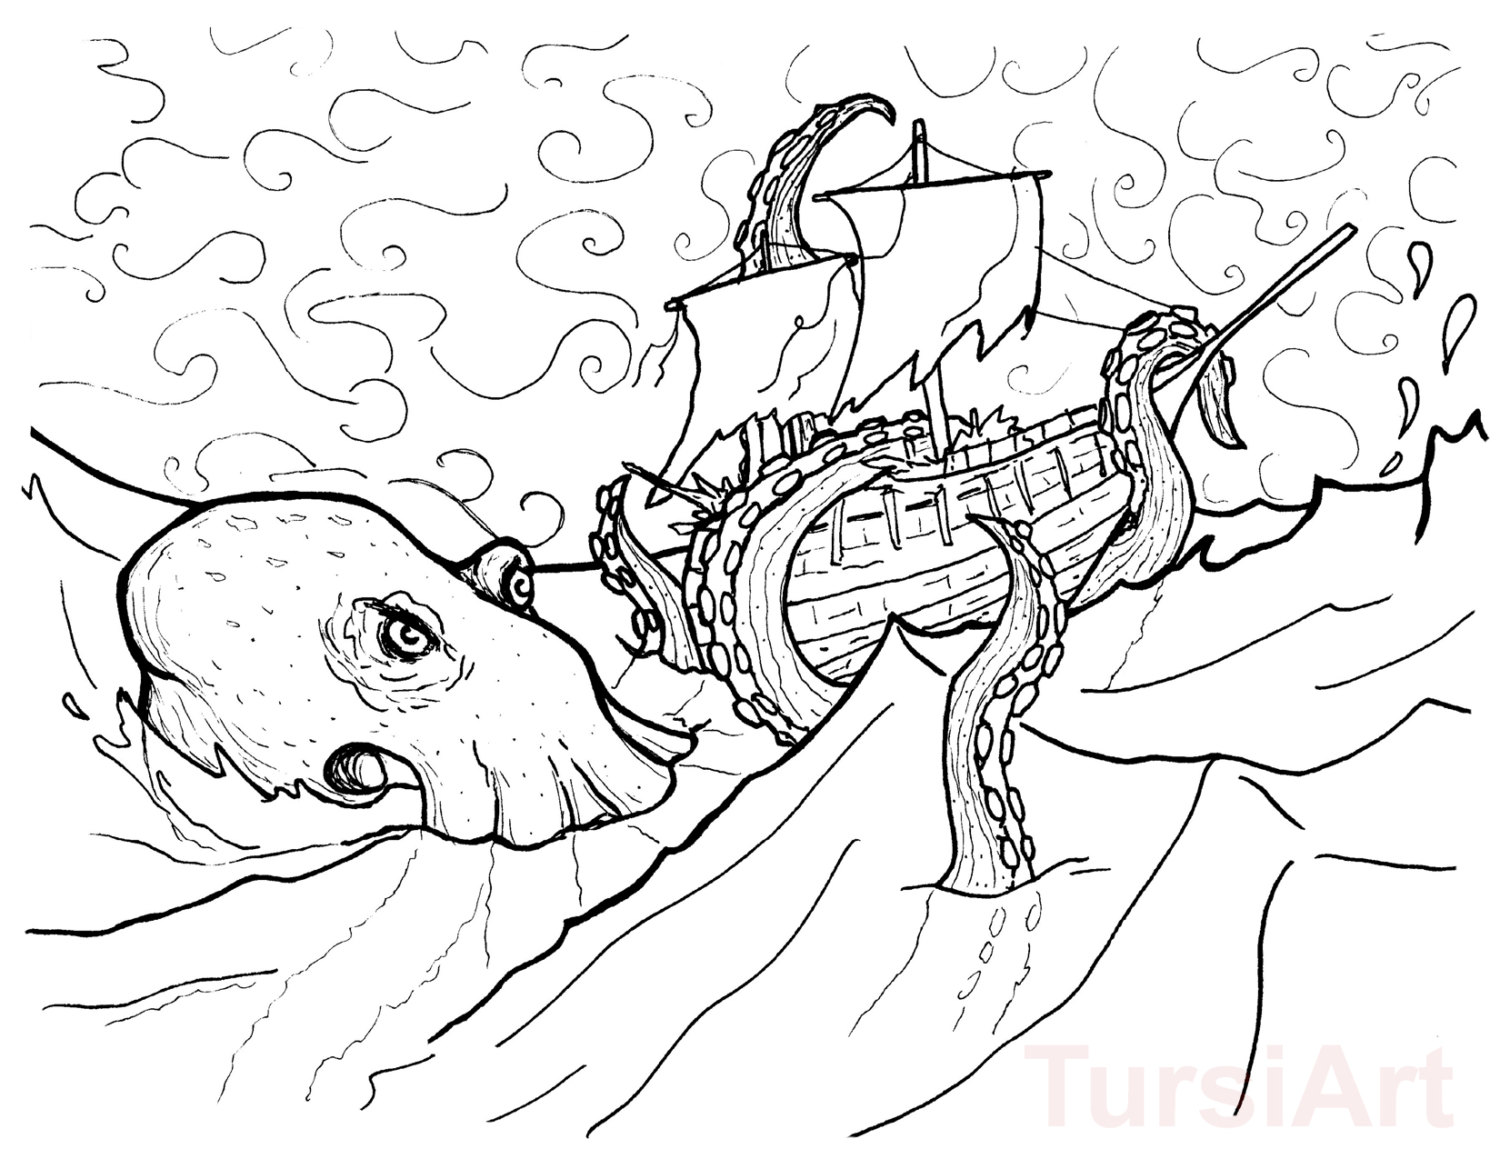 Kraken Atttacking The Ship Coloring Page - Free Printable Coloring Pages  for Kids